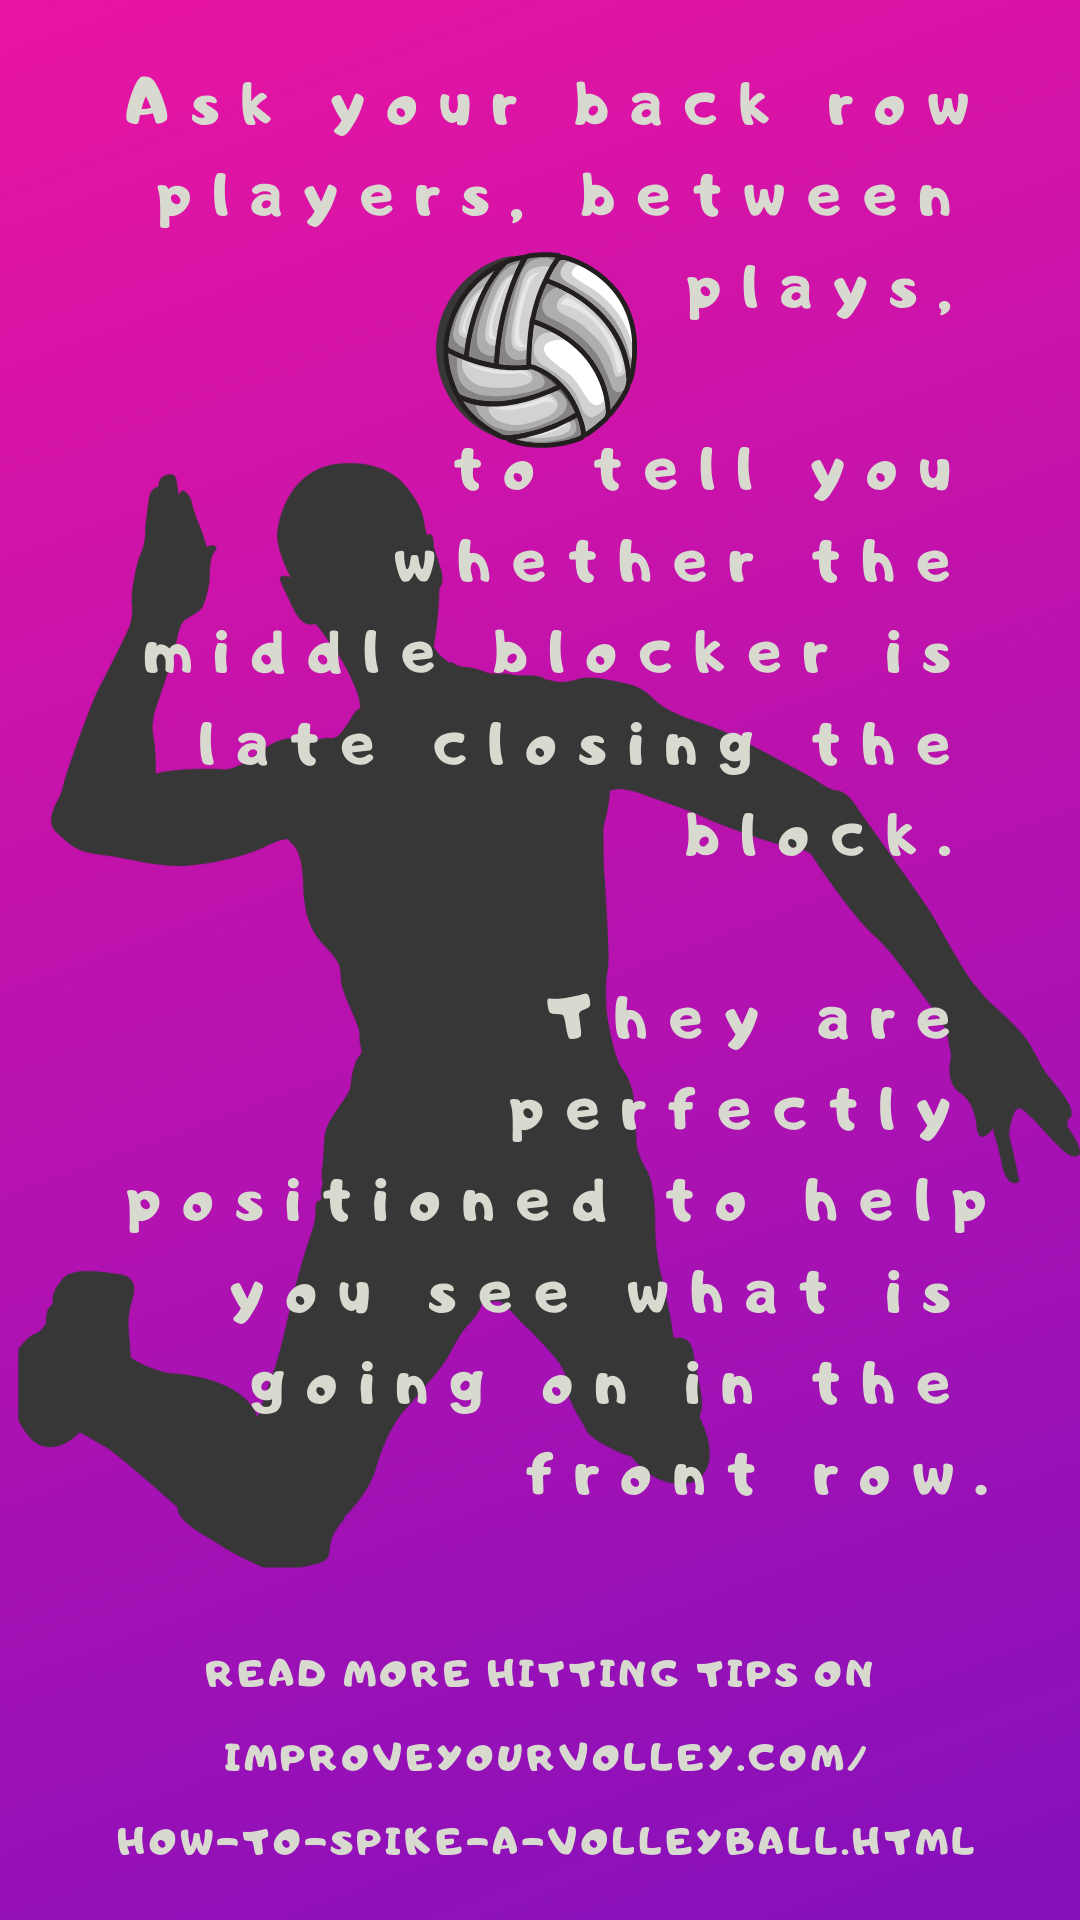 Volleyball Spike Tips: Ask your back row players, between plays, to tell you whether the middle blocker is late closing the block.